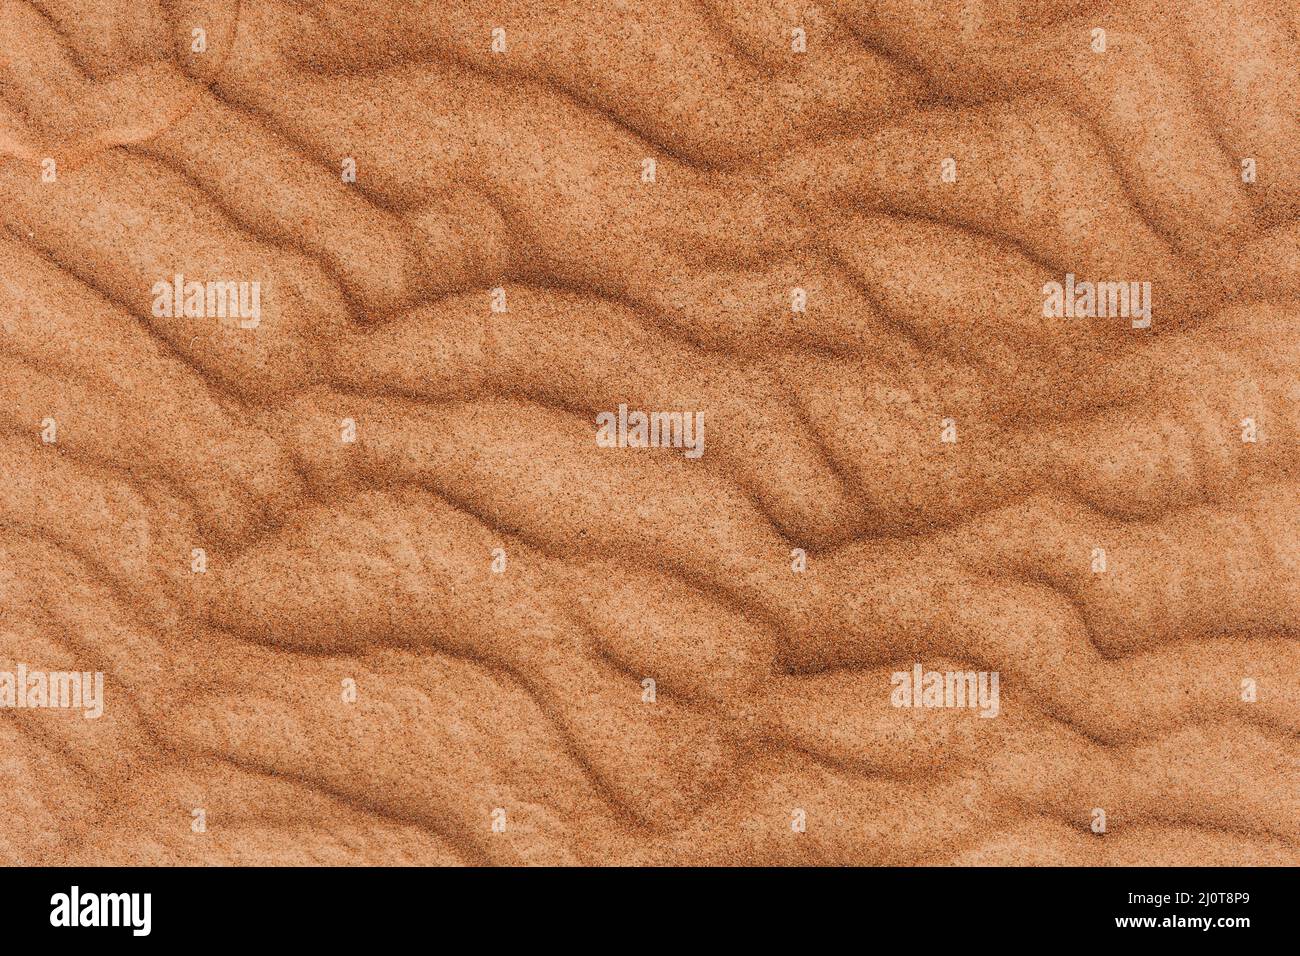 Texture of the sand in the desert. Wavy sand background. Top view. Stock Photo